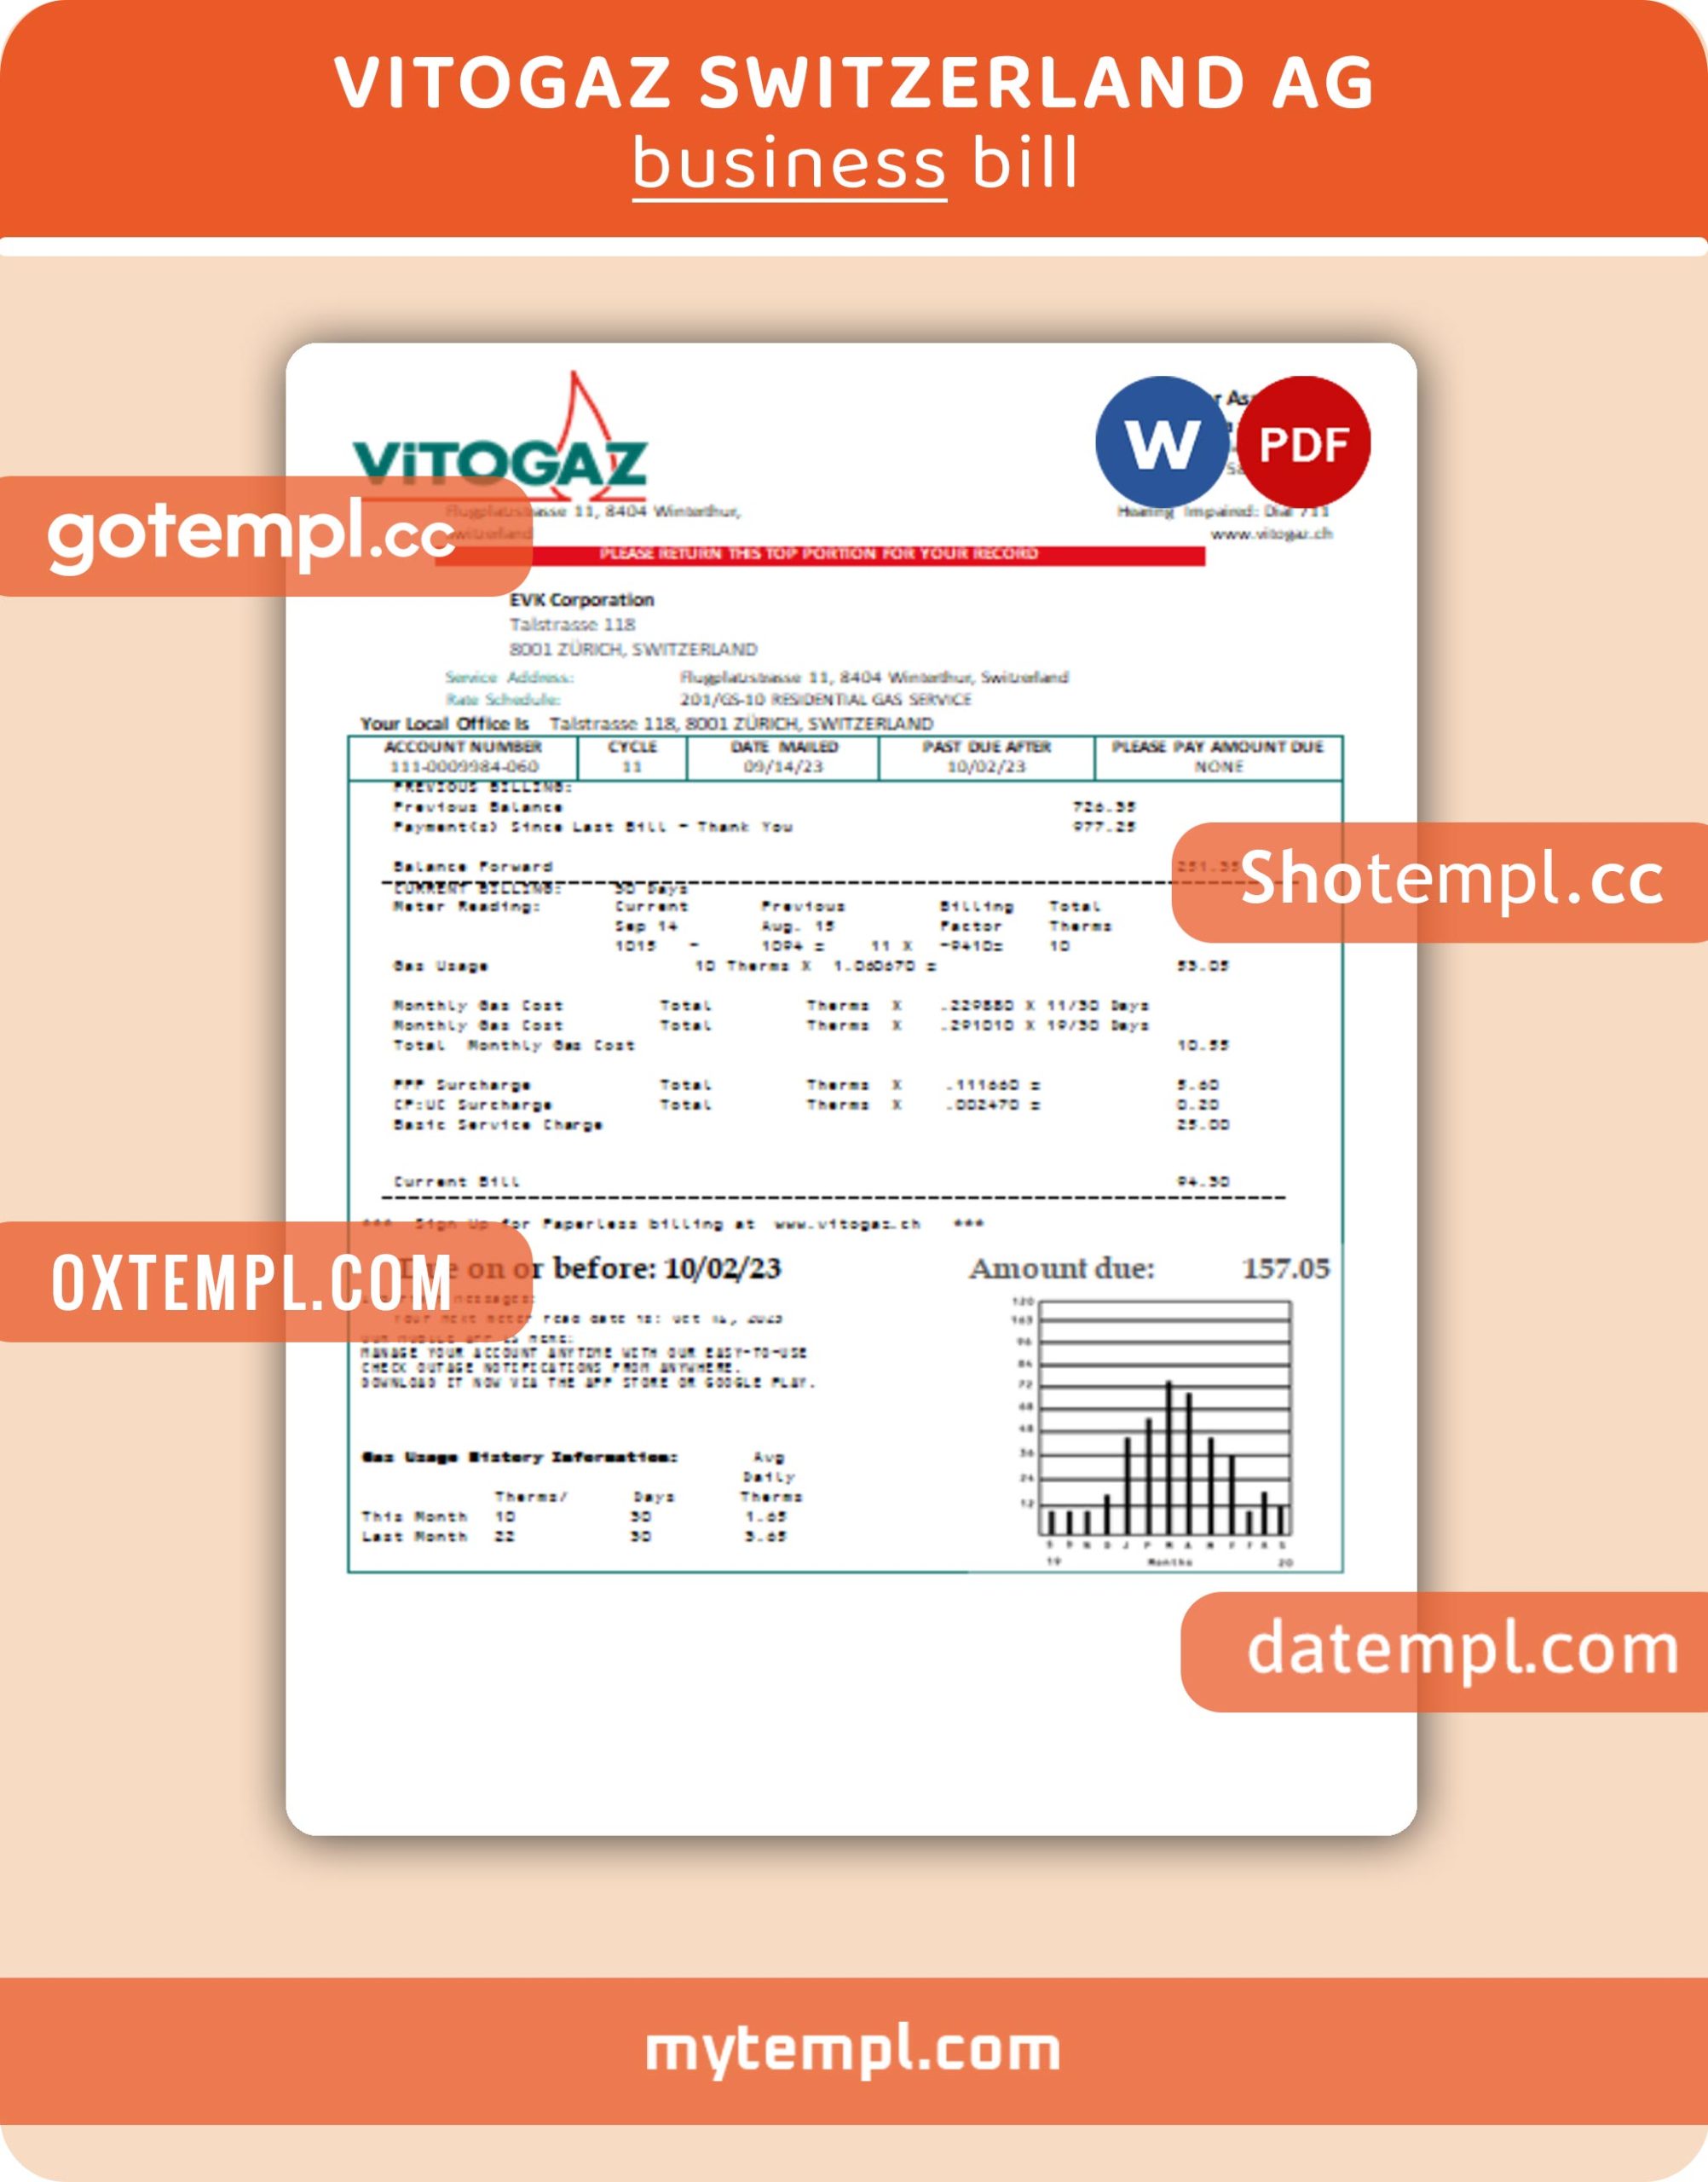 Vitogaz Switzerland AG utility business bill, Word and PDF template, 4 pages, version 3